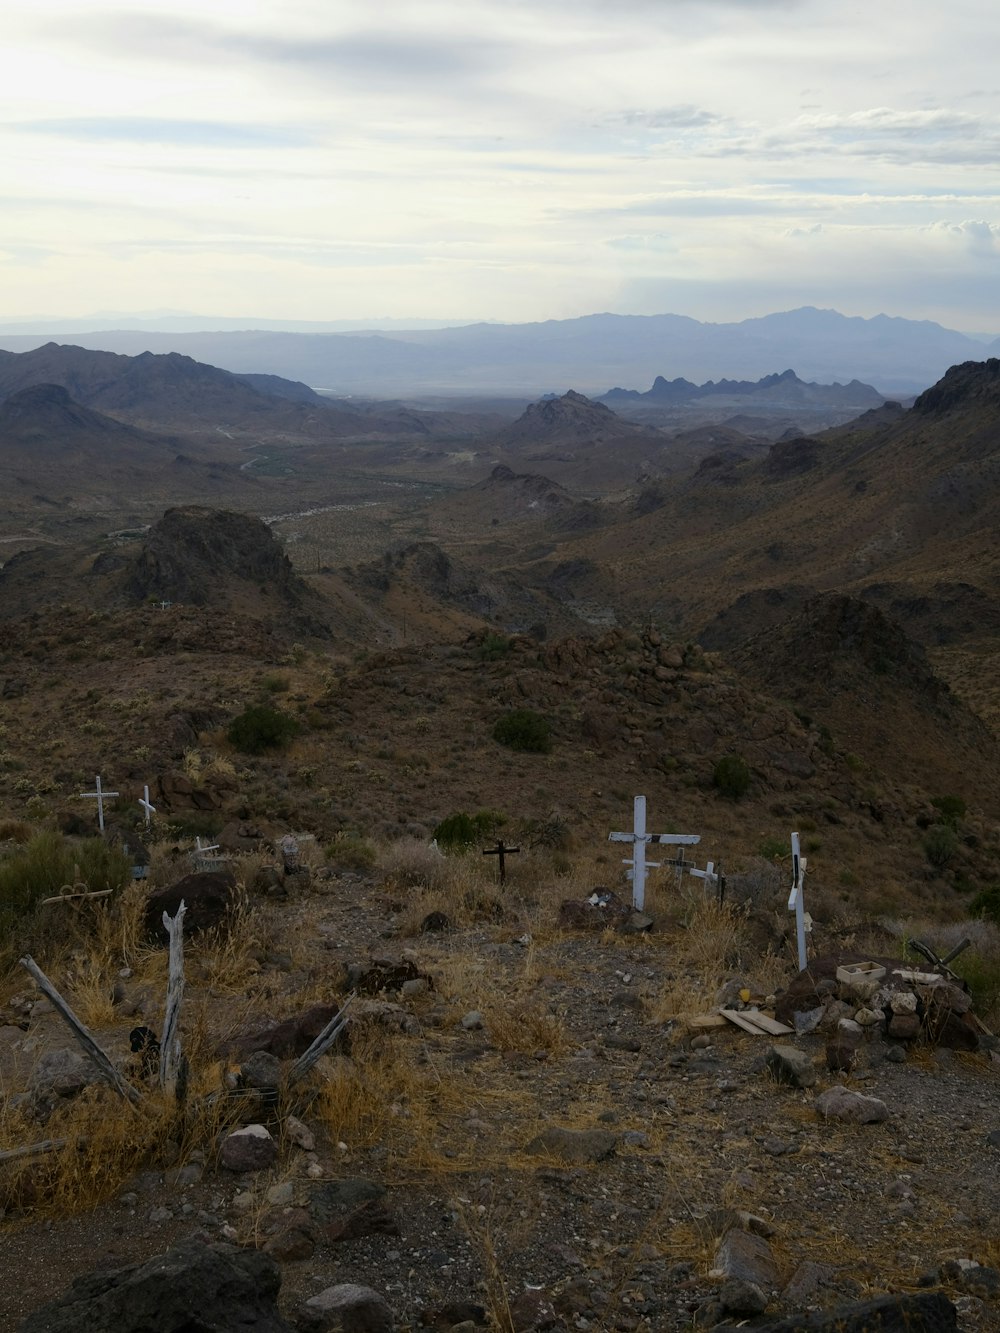 a view of a mountain range with crosses in the foreground